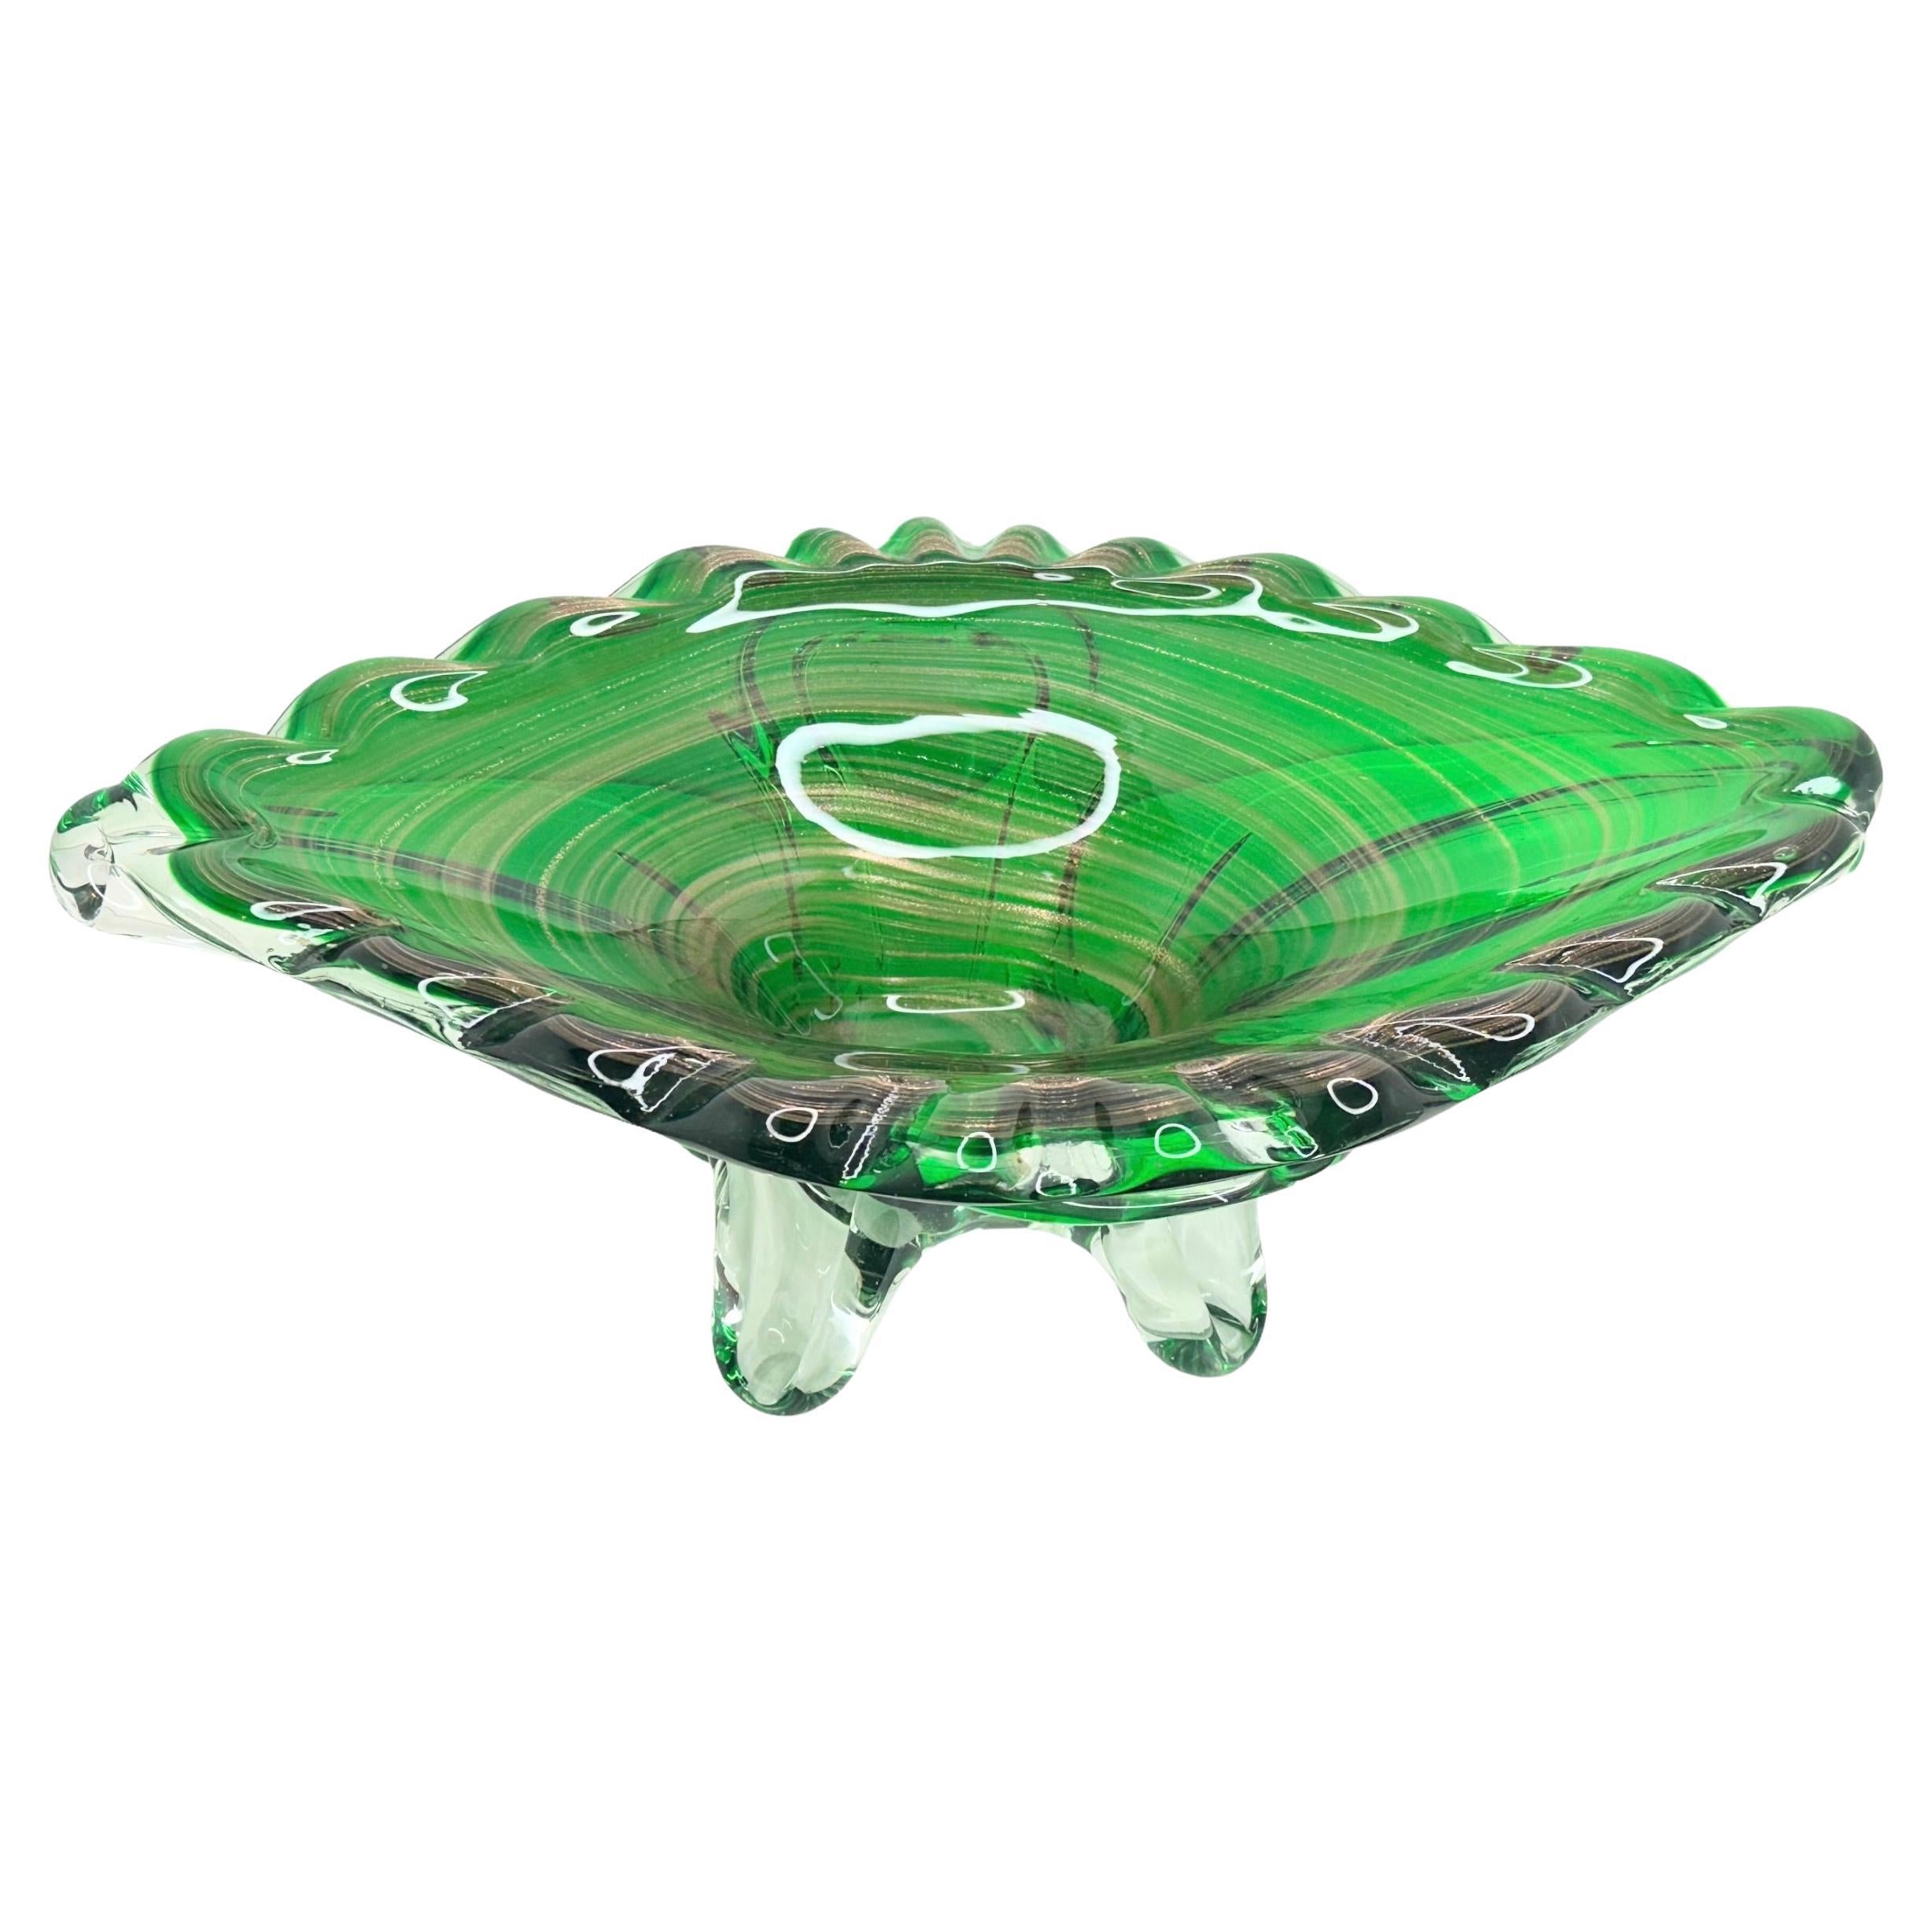 Gorgeous hand blown Murano art glass piece with Sommerso and bullicante techniques. A beautiful organic shaped bowl, catchall or centrepiece, Venice, Murano, Italy. Colors are green and clear, with gold flake swirls from the inside to the outside. A